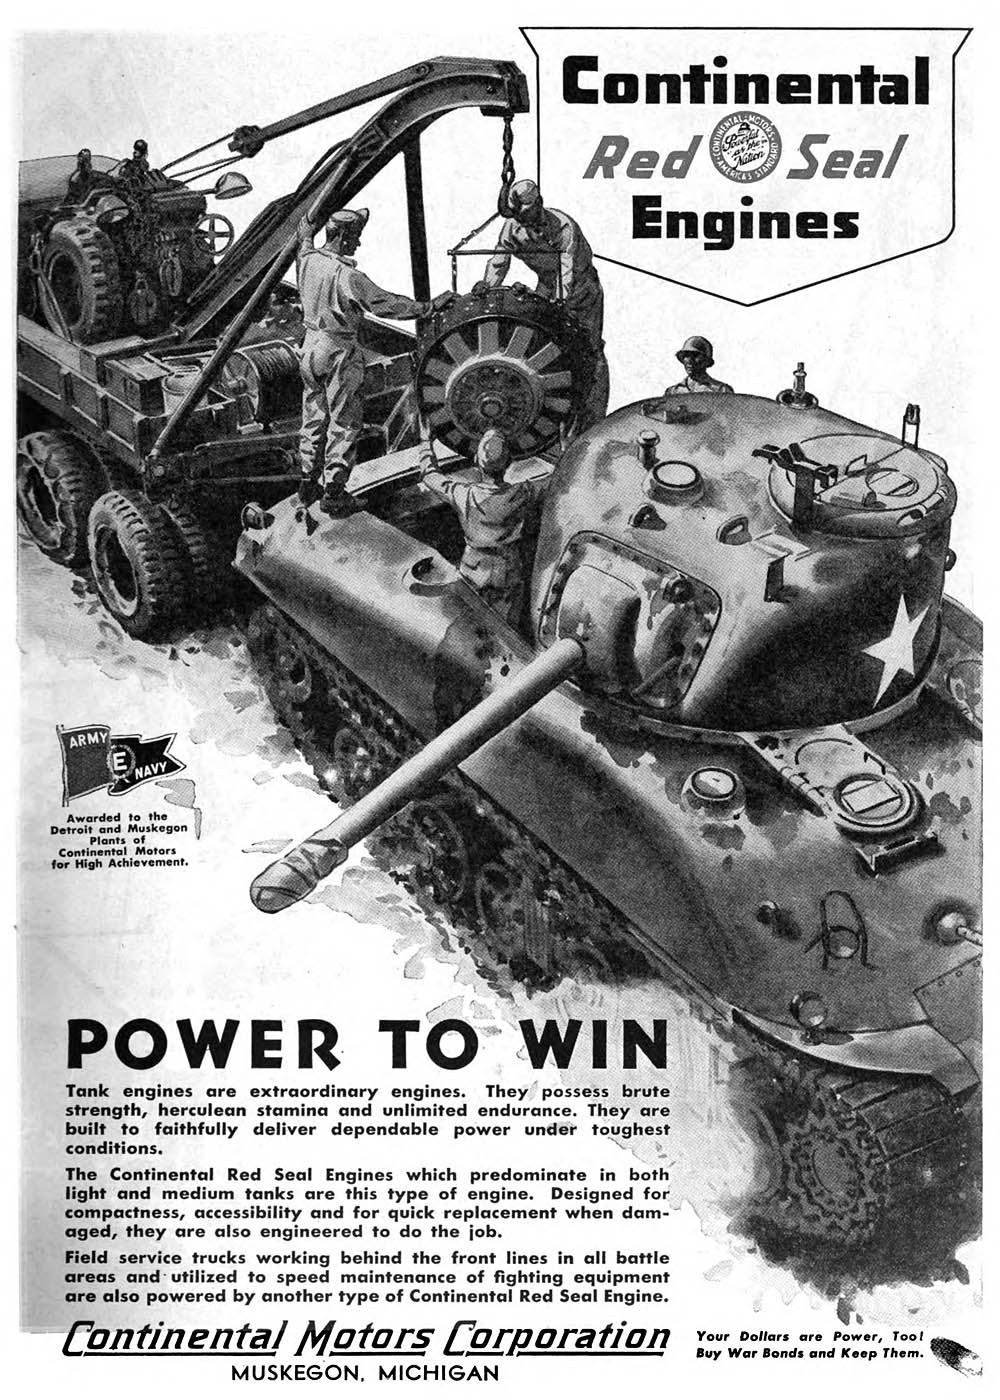 Advertisement for Continental Red Seal Engines, the Power to Win.